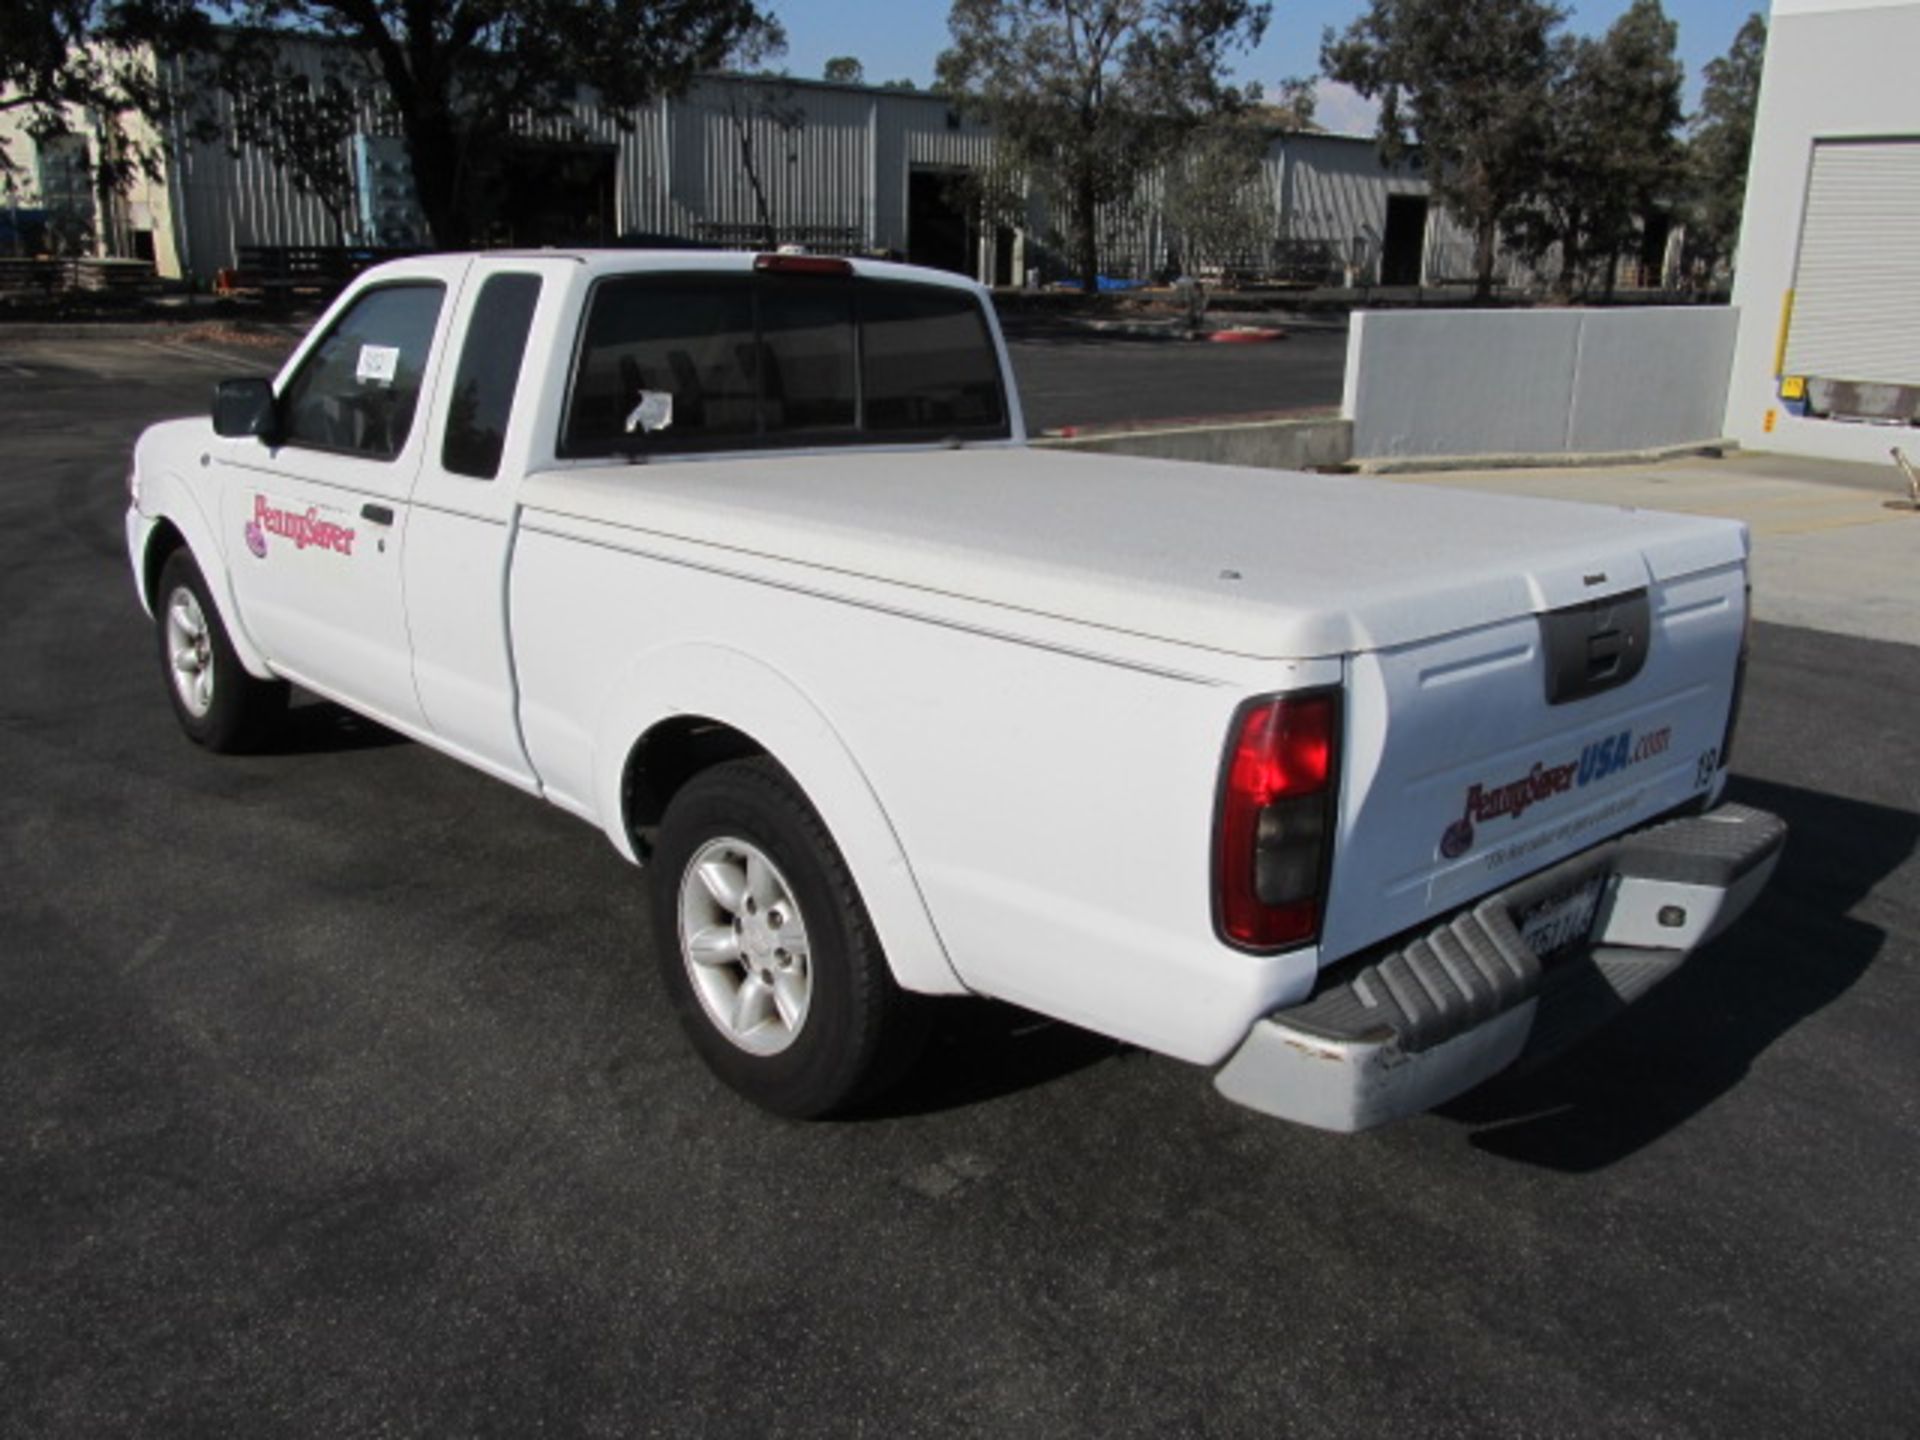 2001 Nissan Frontier XE Pick Up Truck With 4 Cylinder Twin Cam 16 Valve Engine, 5 Speed Manual - Image 6 of 8